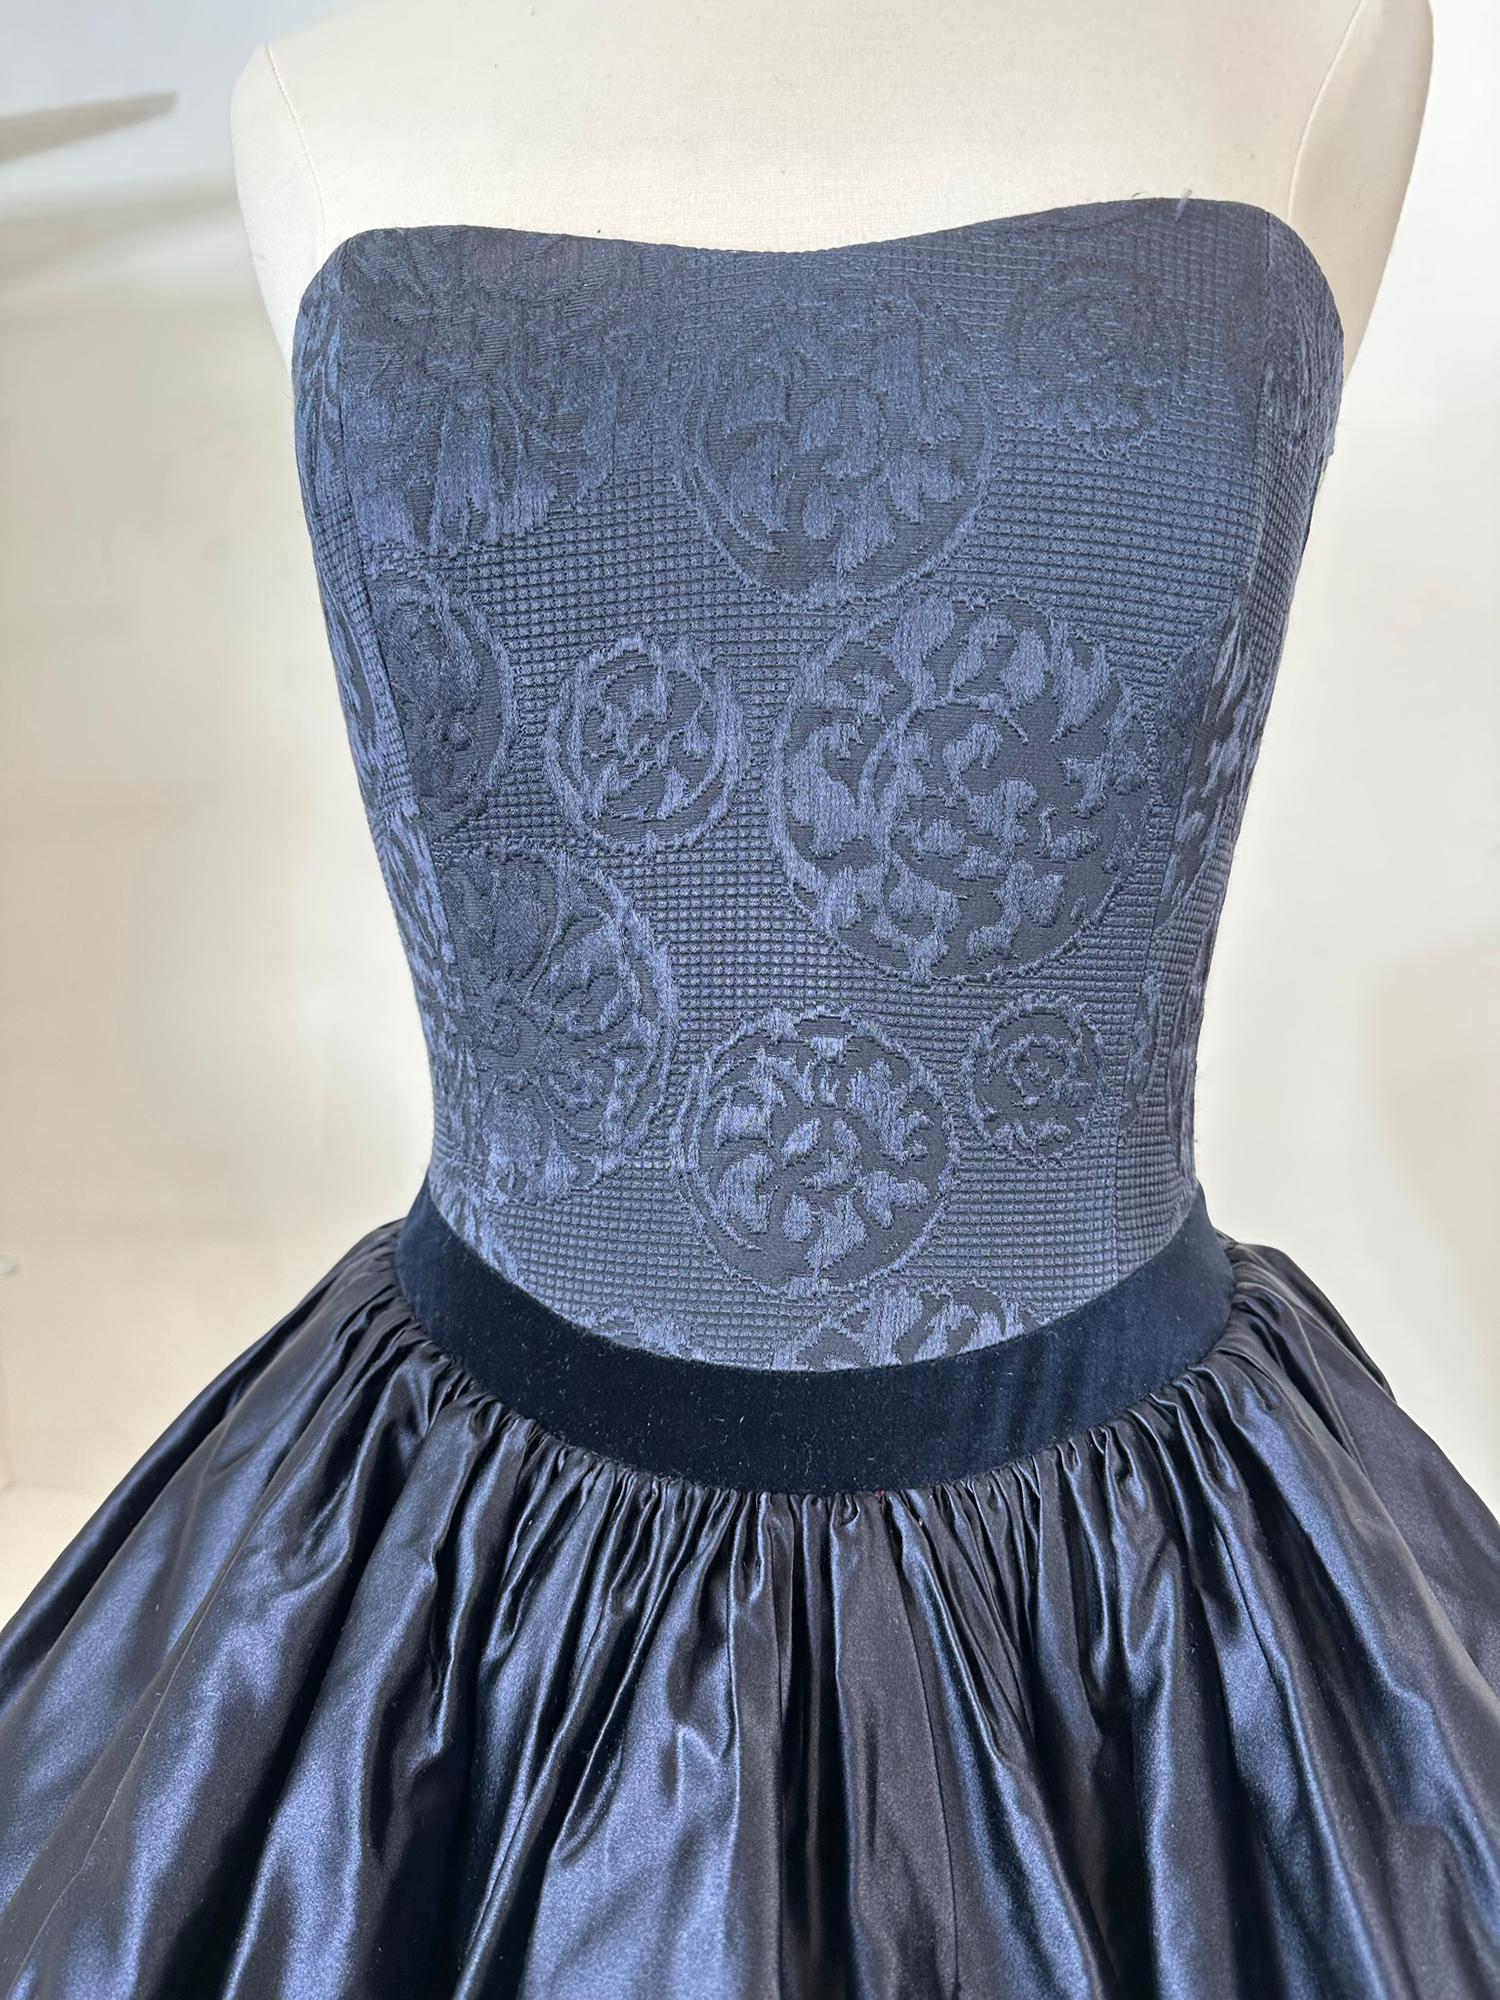  
Louis Feraud blue silk damask strapless bodice with tiered poof skirt, evening gown with train from the 1980s. This gorgeous dress has a fitted boned bodice of blue figured silk damask. The long skirt is dark blue silk with two layers of full